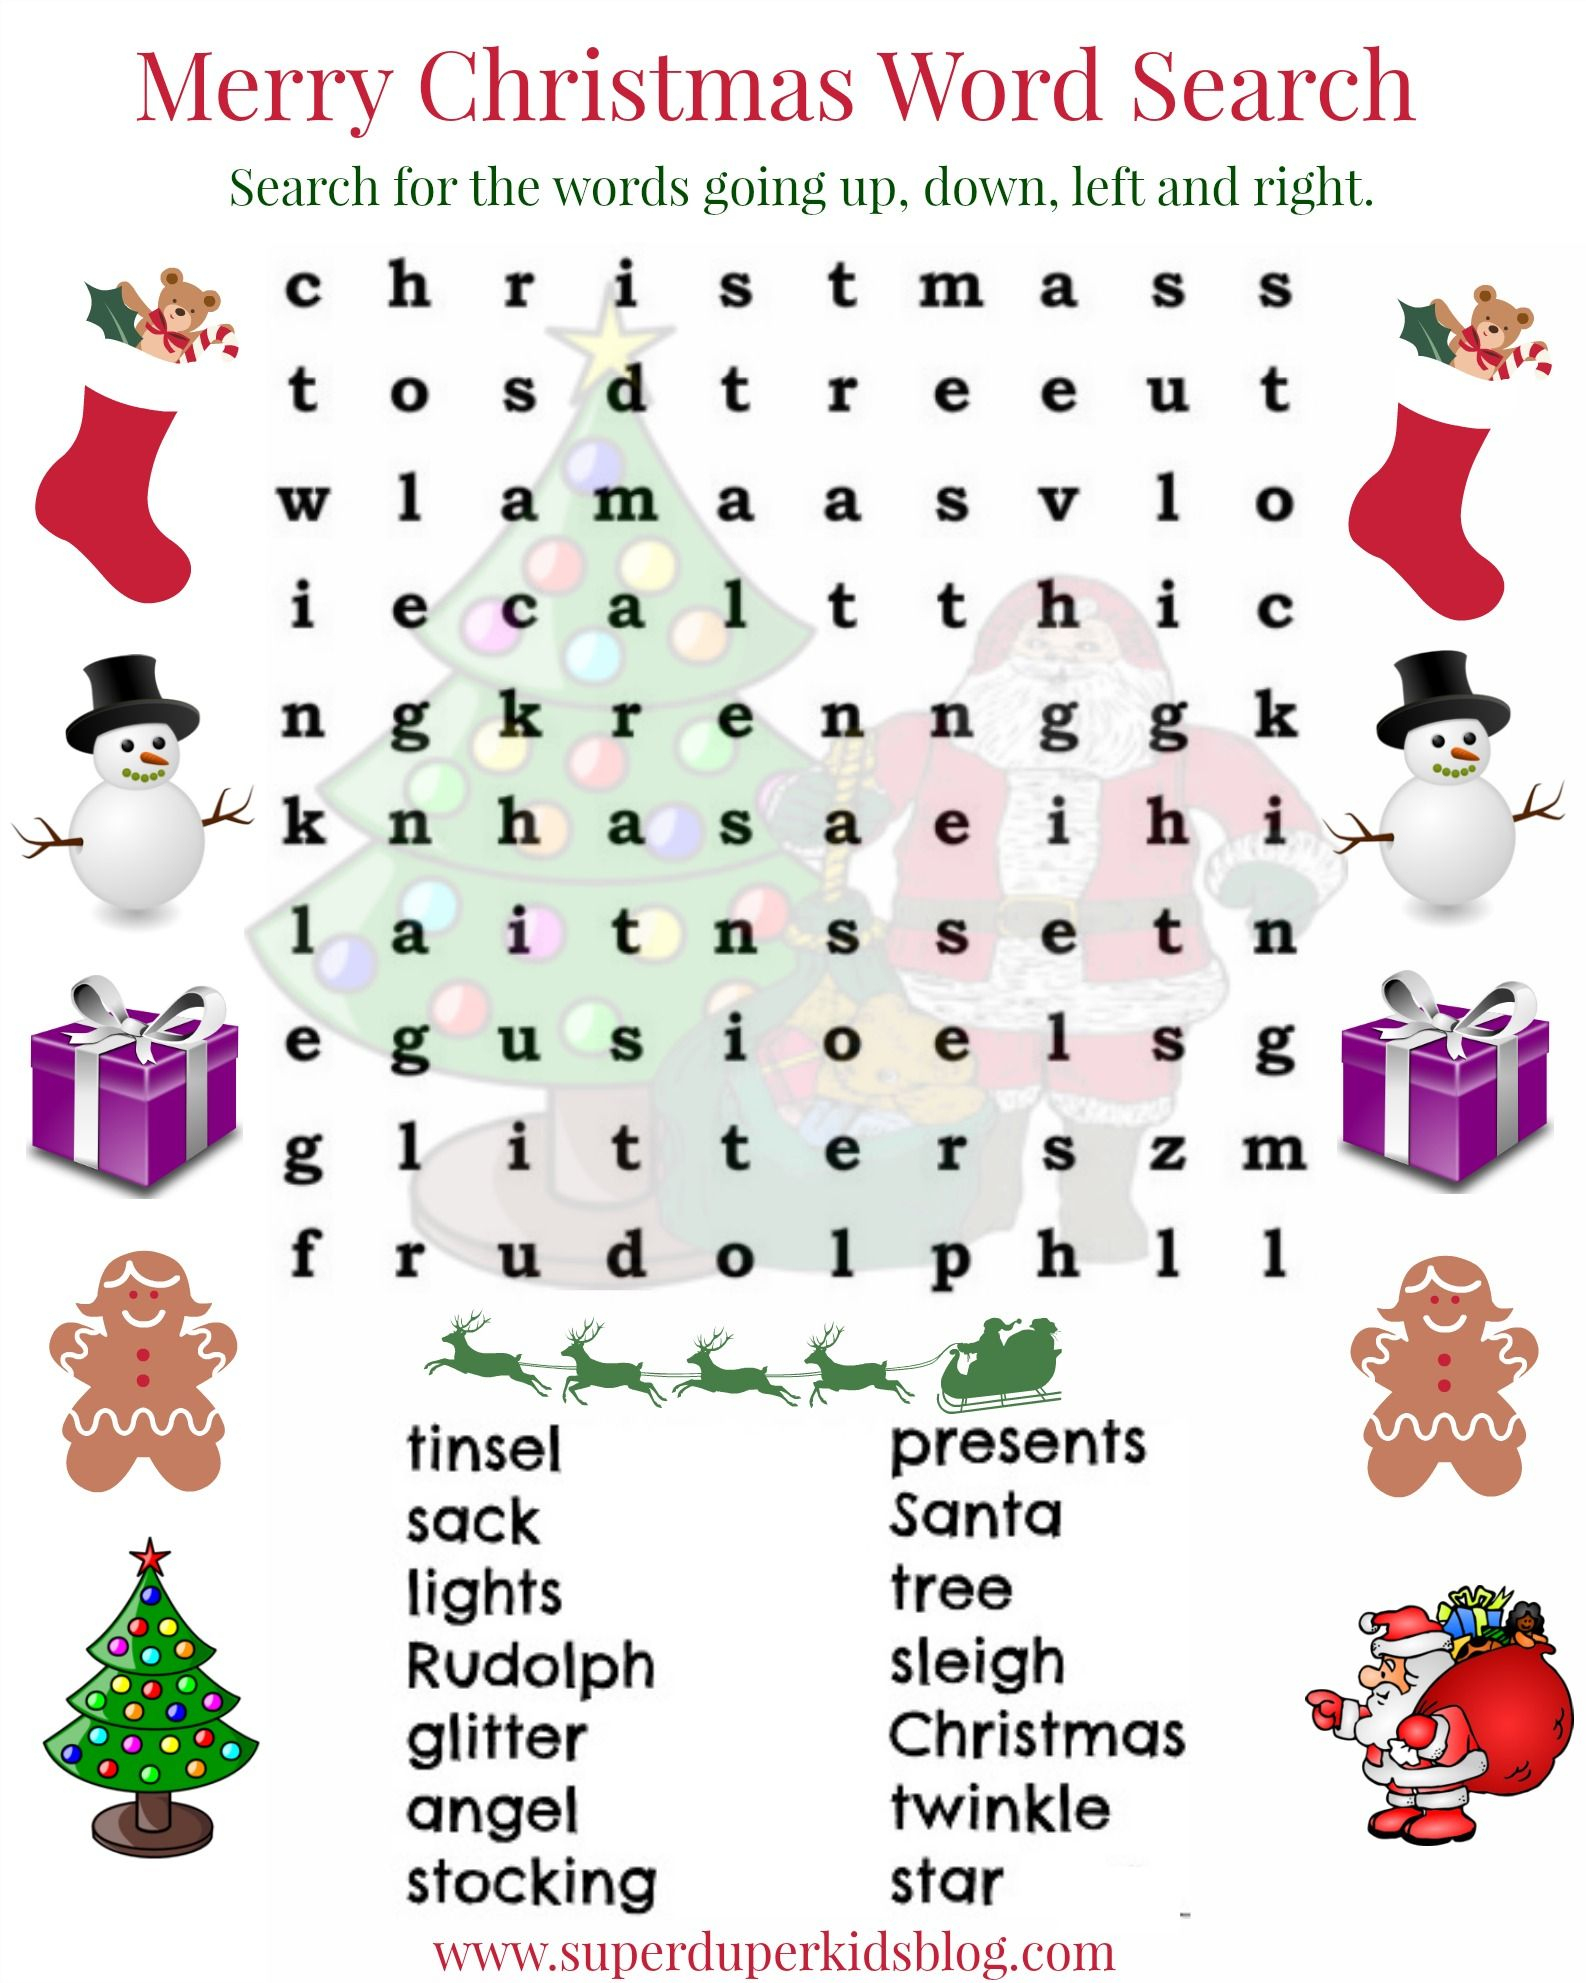 Pinalicia Weibley On Alicia | Christmas Word Search